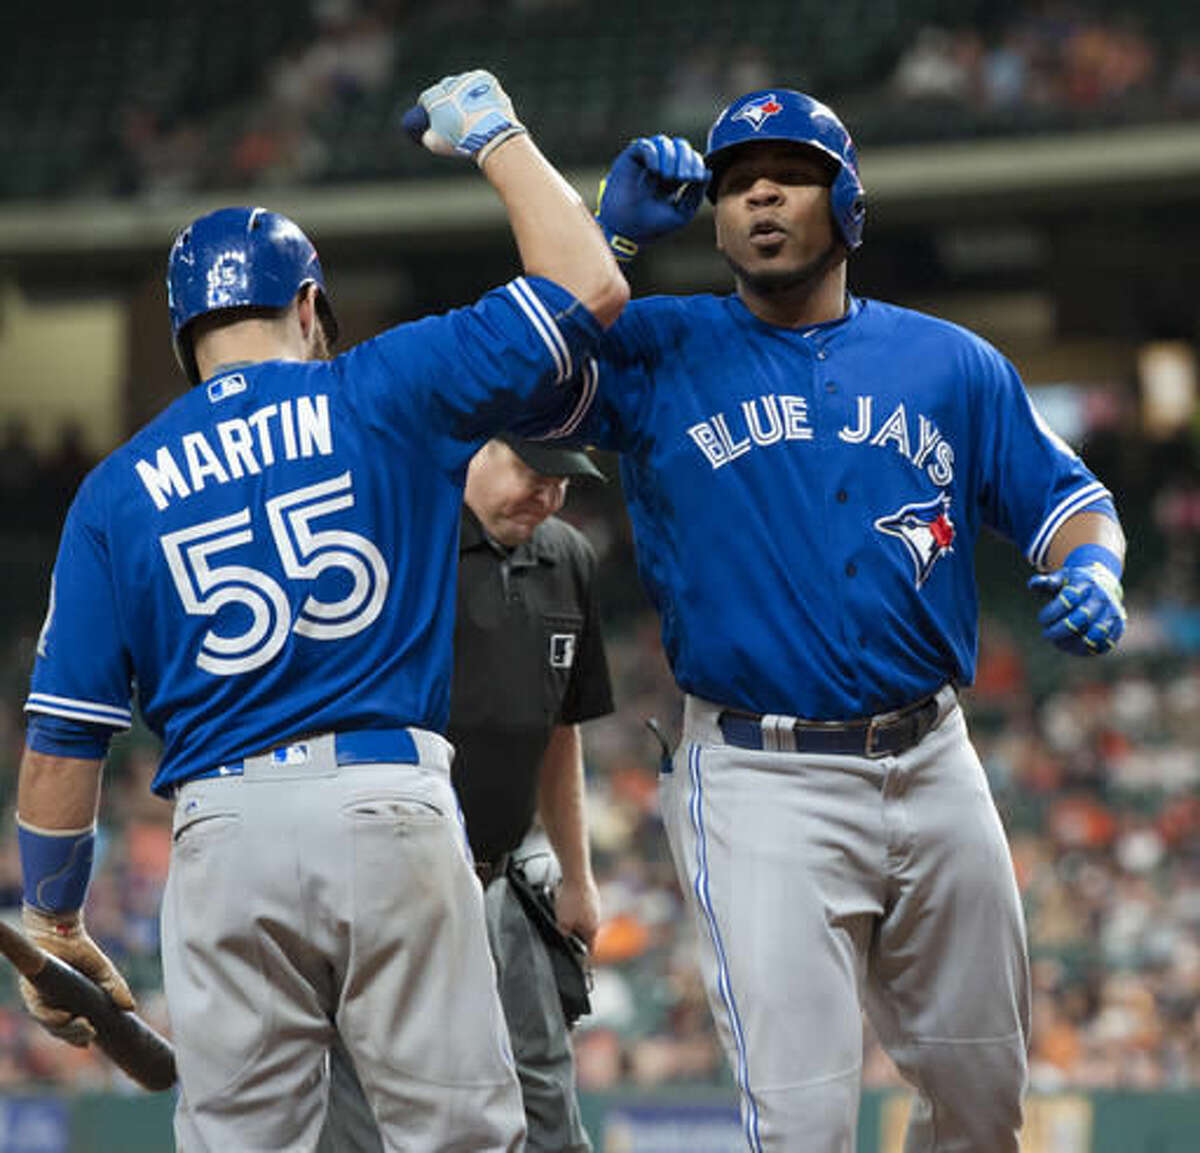 Toronto Blue Jays' Edwin Encarnacion, right, celebrates a solo home run against the Houston Astros with Russell Martin during the ninth inning of a baseball game Thursday, Aug. 4, 2016, in Houston. (AP Photo/George Bridges)